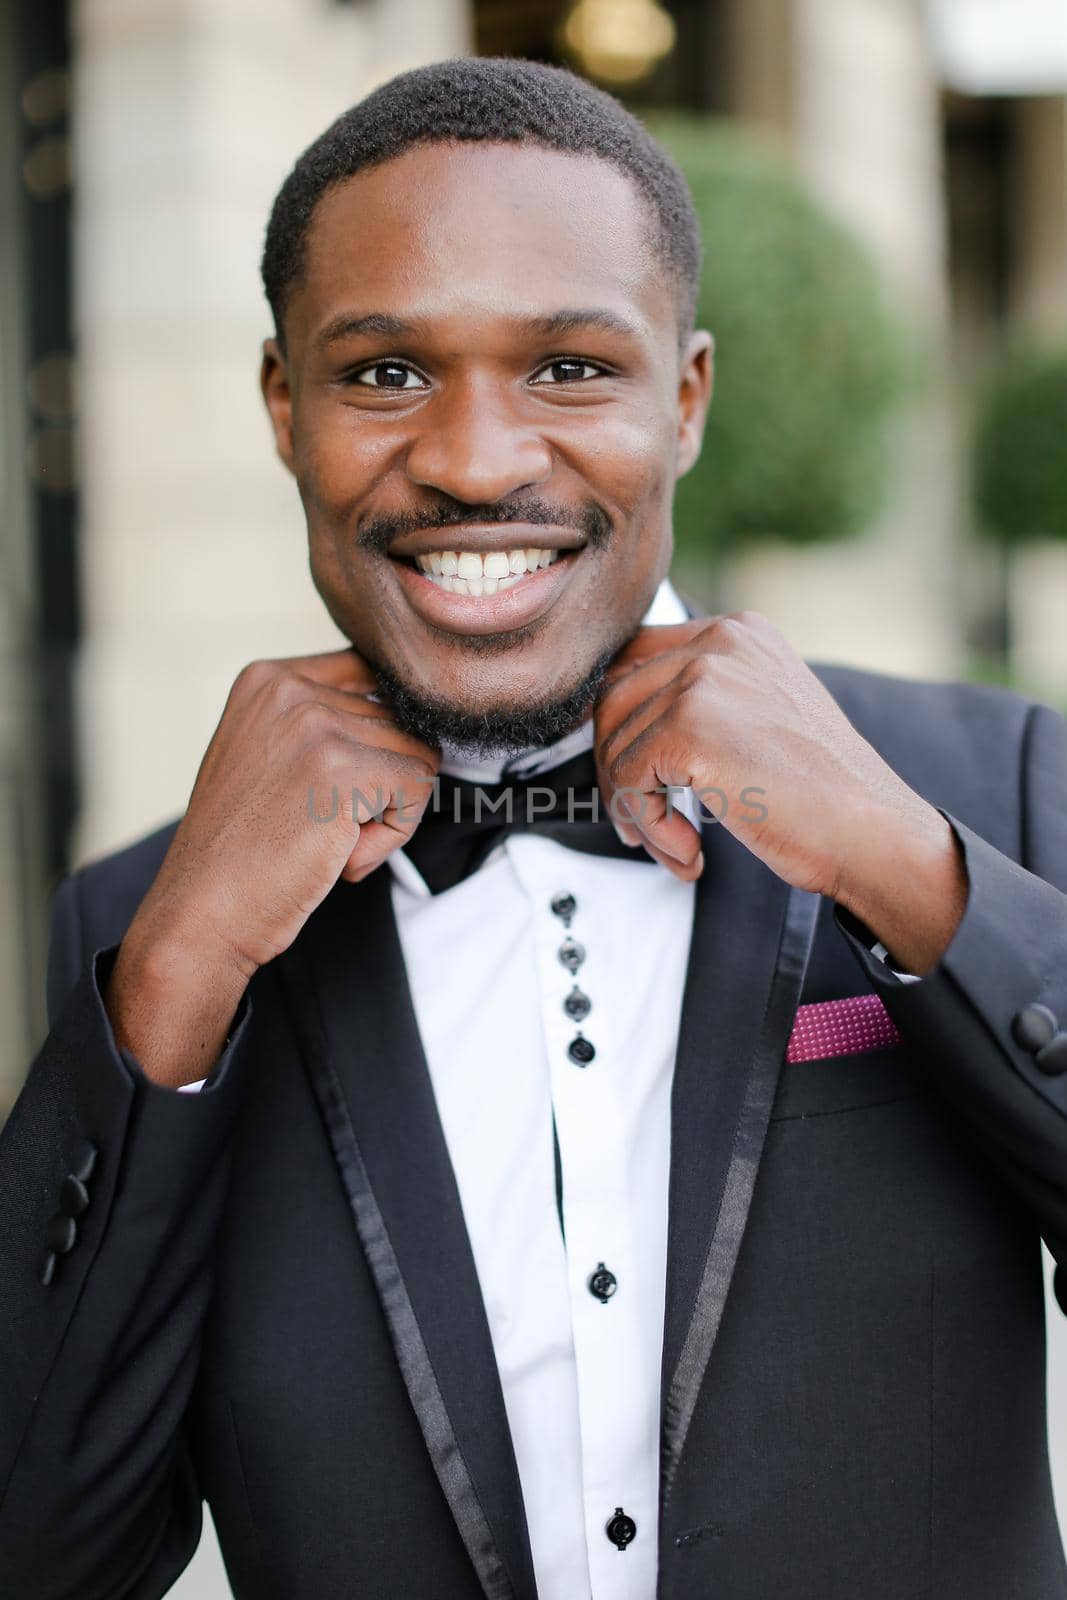 Portrait of afro american handsome man wearing suit and smiling. Concept of black businessman.